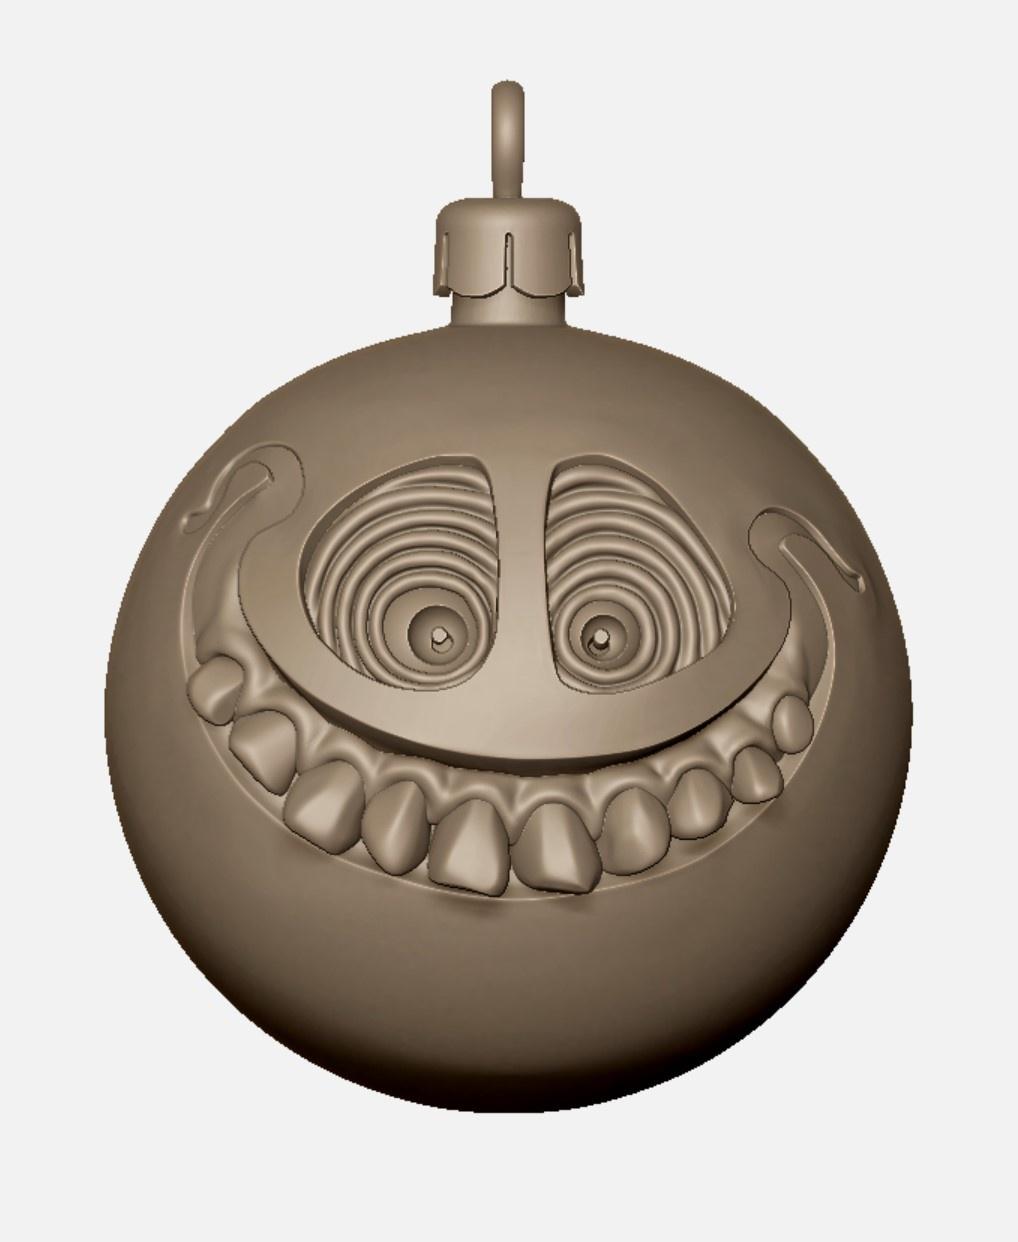 Grinning Christmas Ornament   3d model